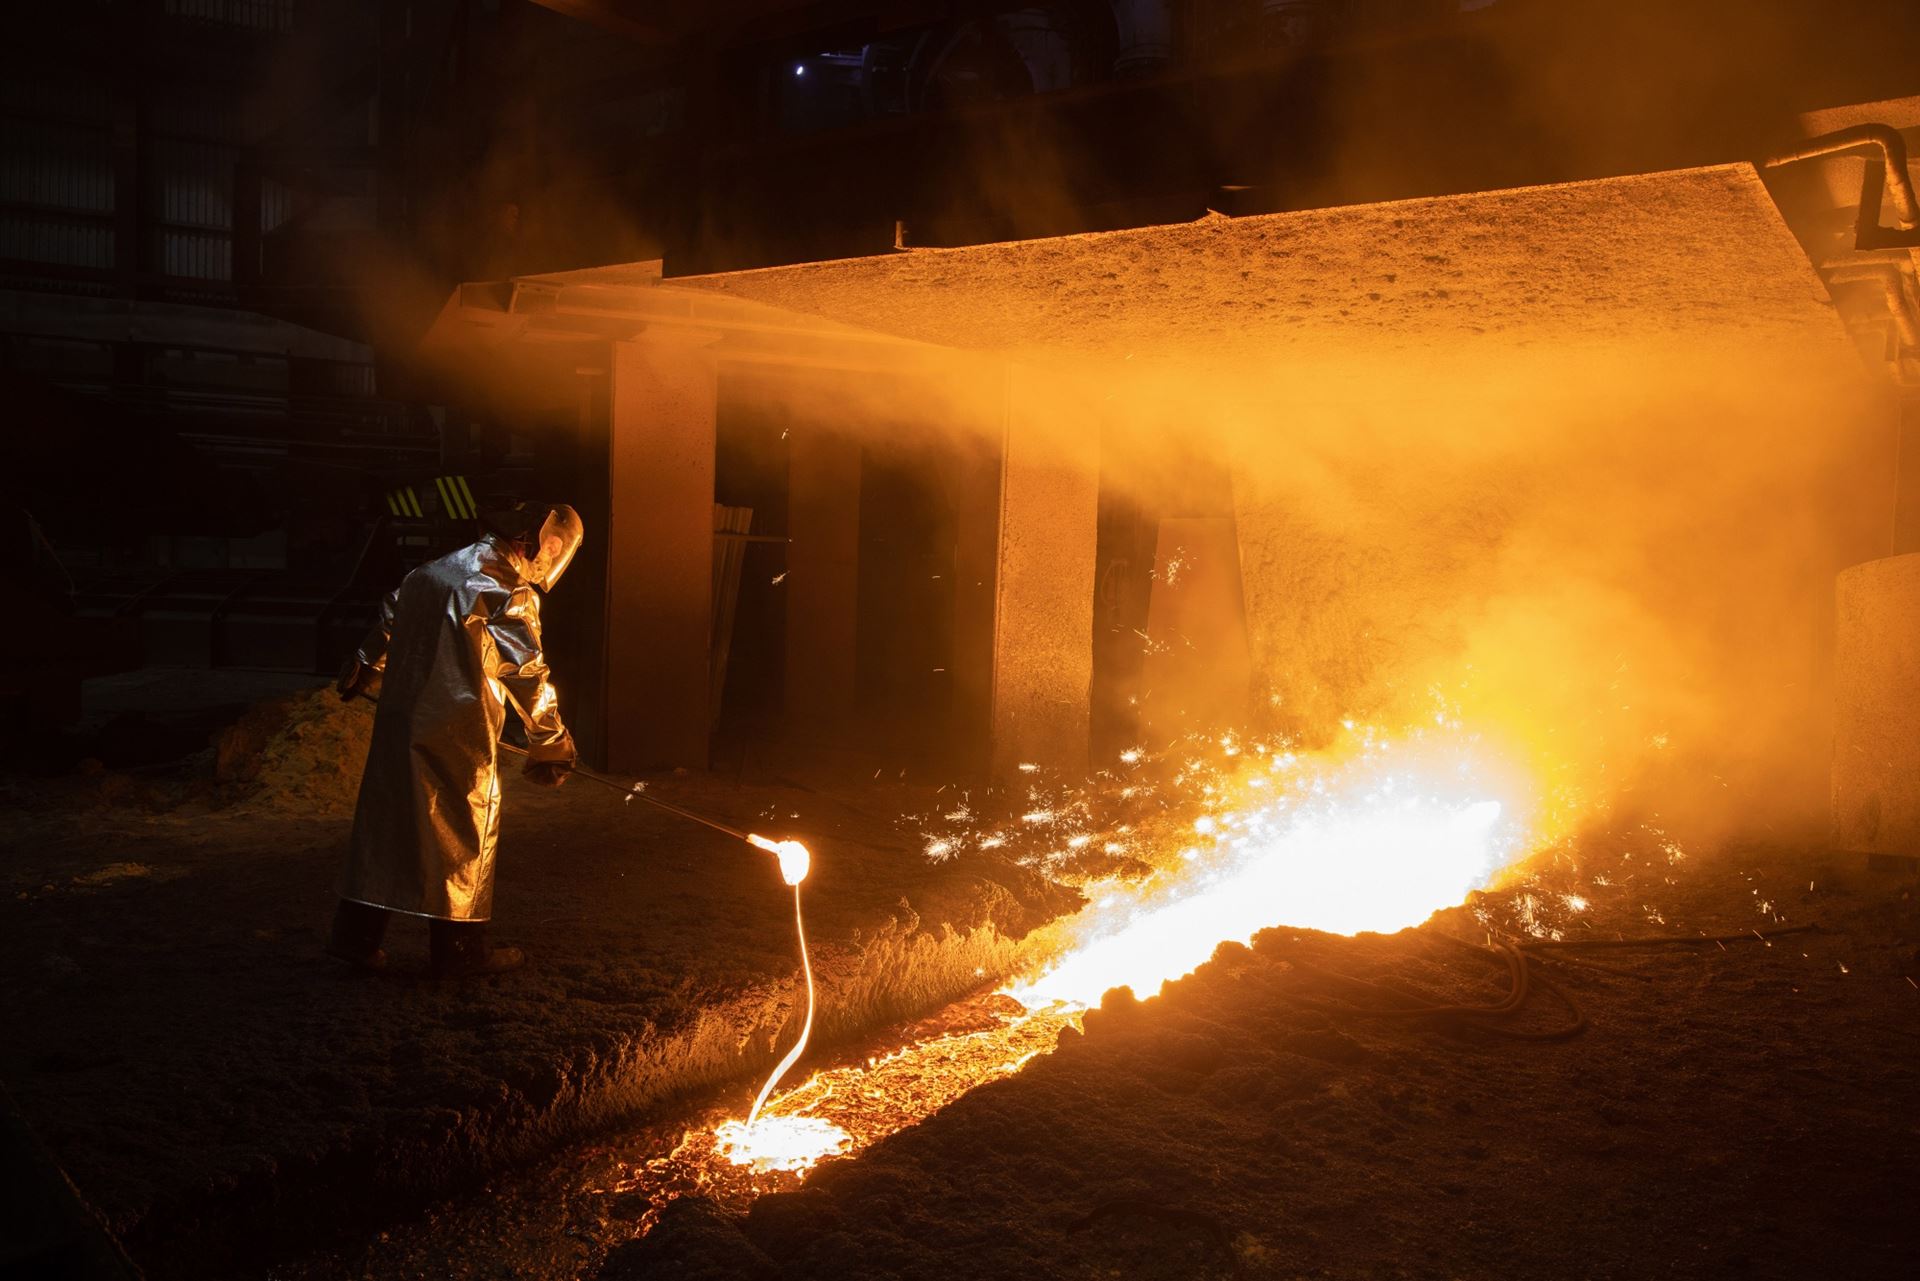 Daily crude steel production of CISA's member mills in China decreased 